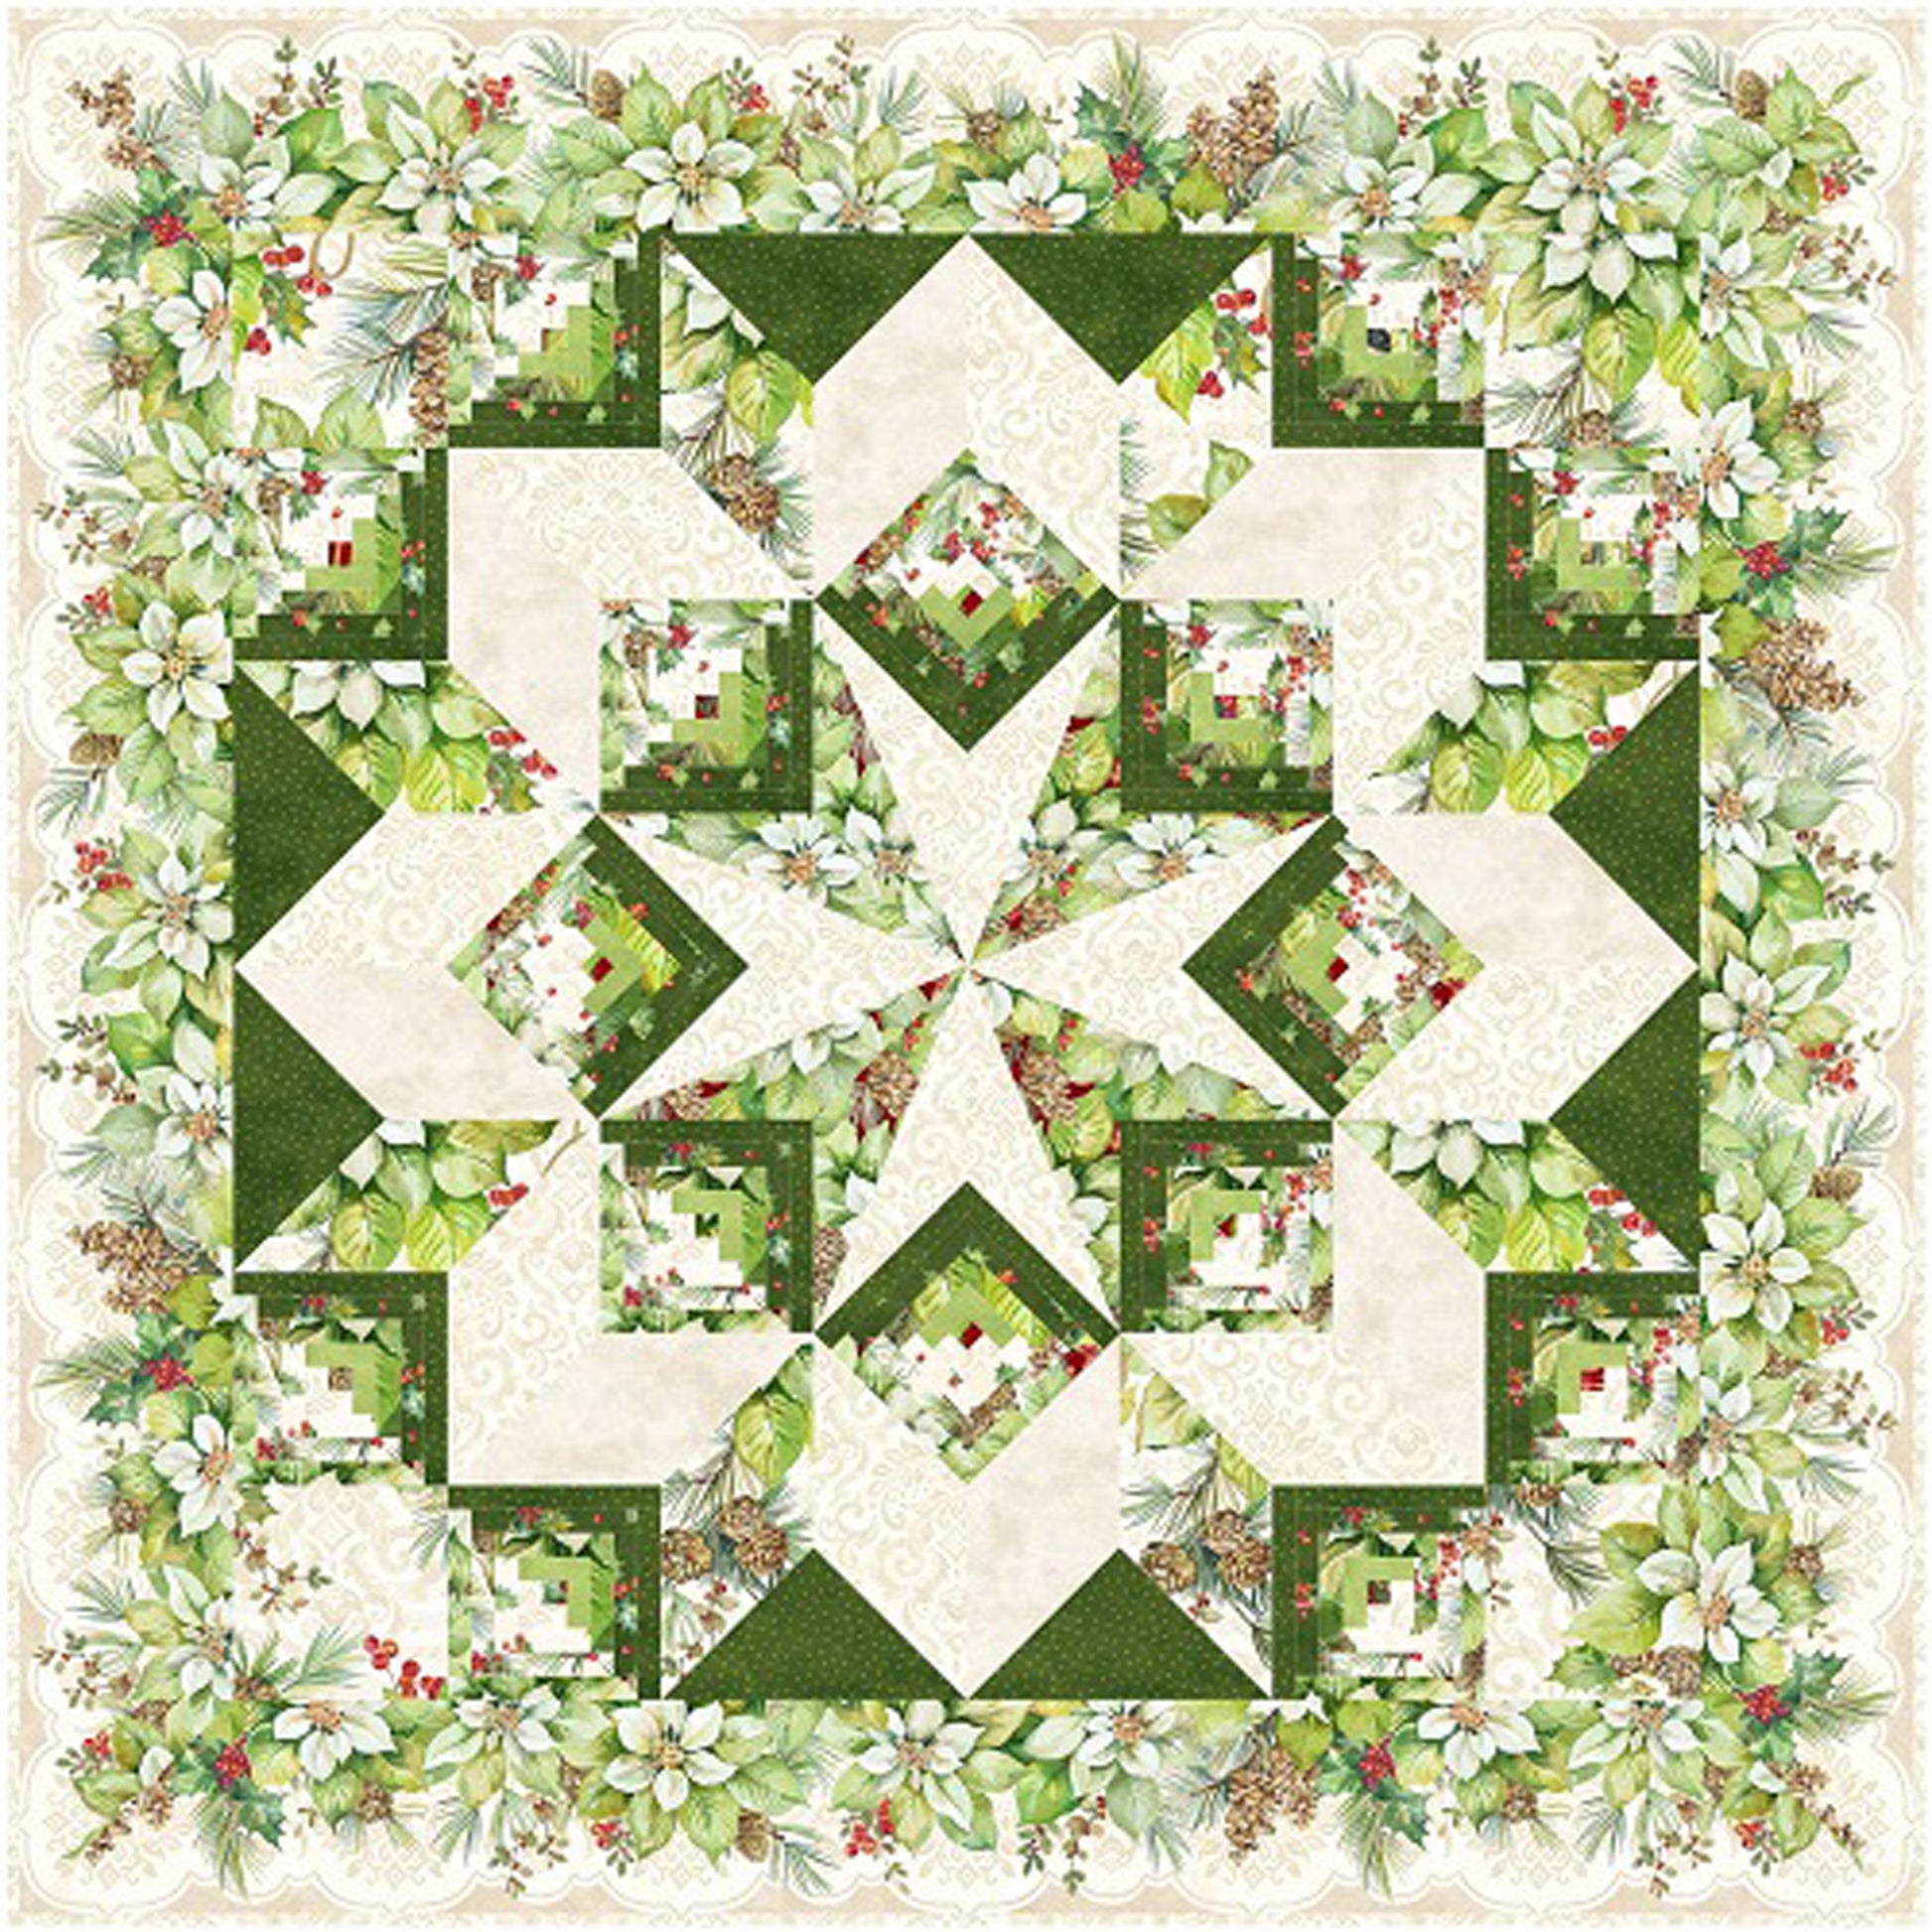 A beautiful quilted star design adorned with green leaves and berries fabric in greens and cream.